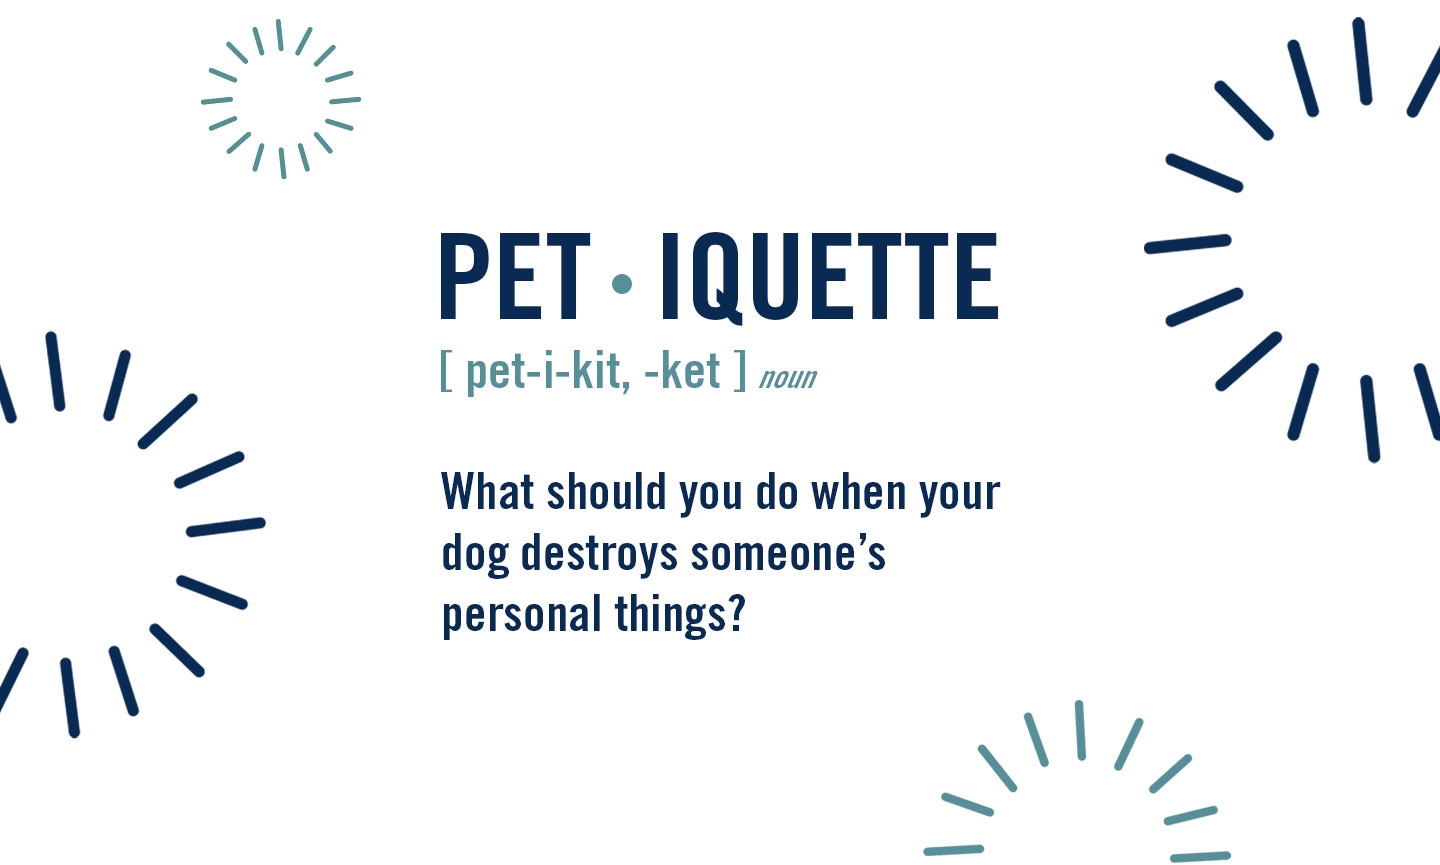 petiquette: what to do when your dog or cat destroys someone's things